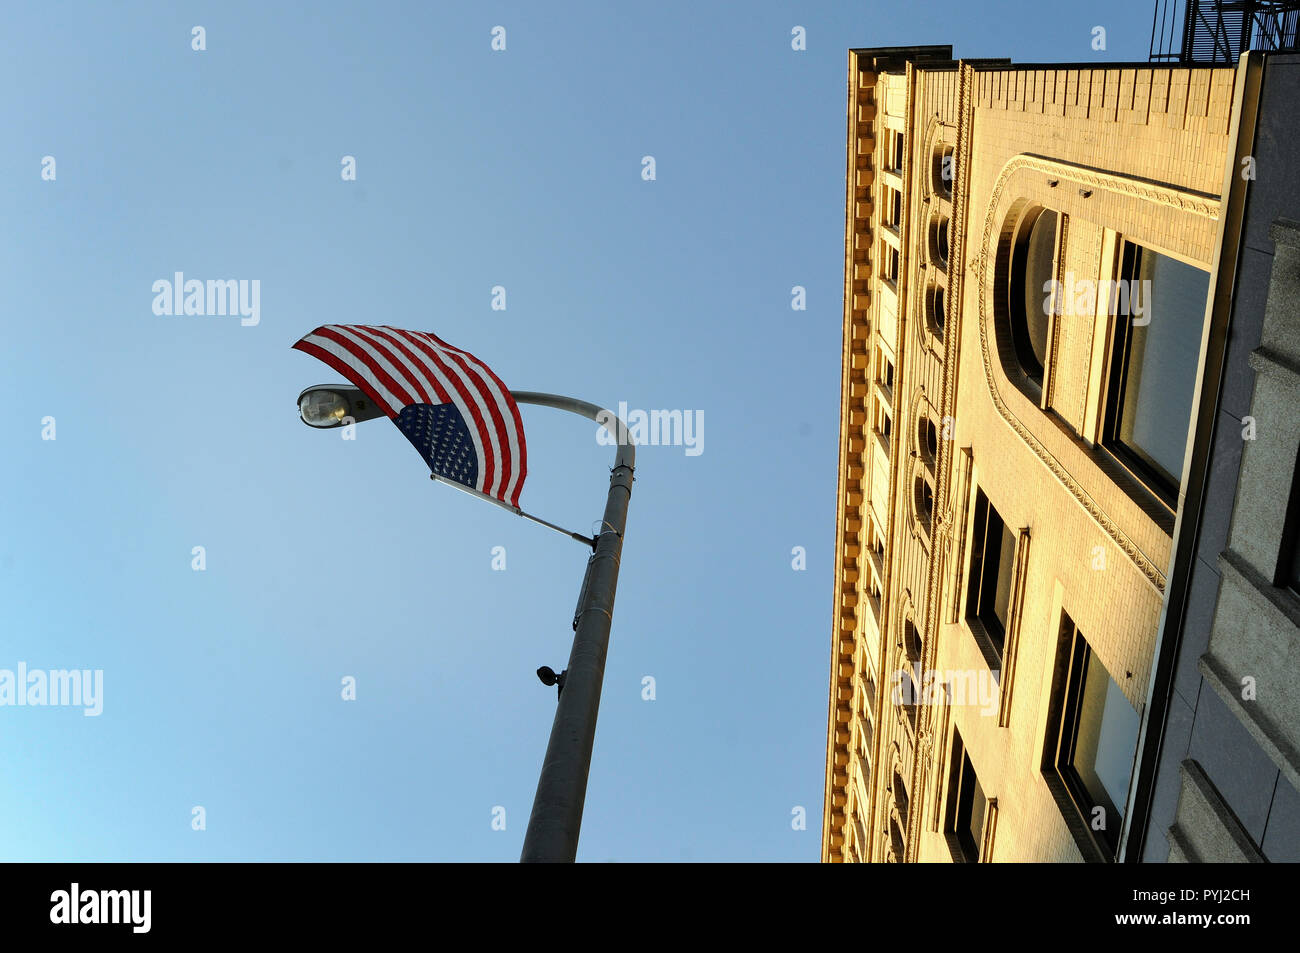 An American flag hangs upside down from a light standard on a city street. Stock Photo